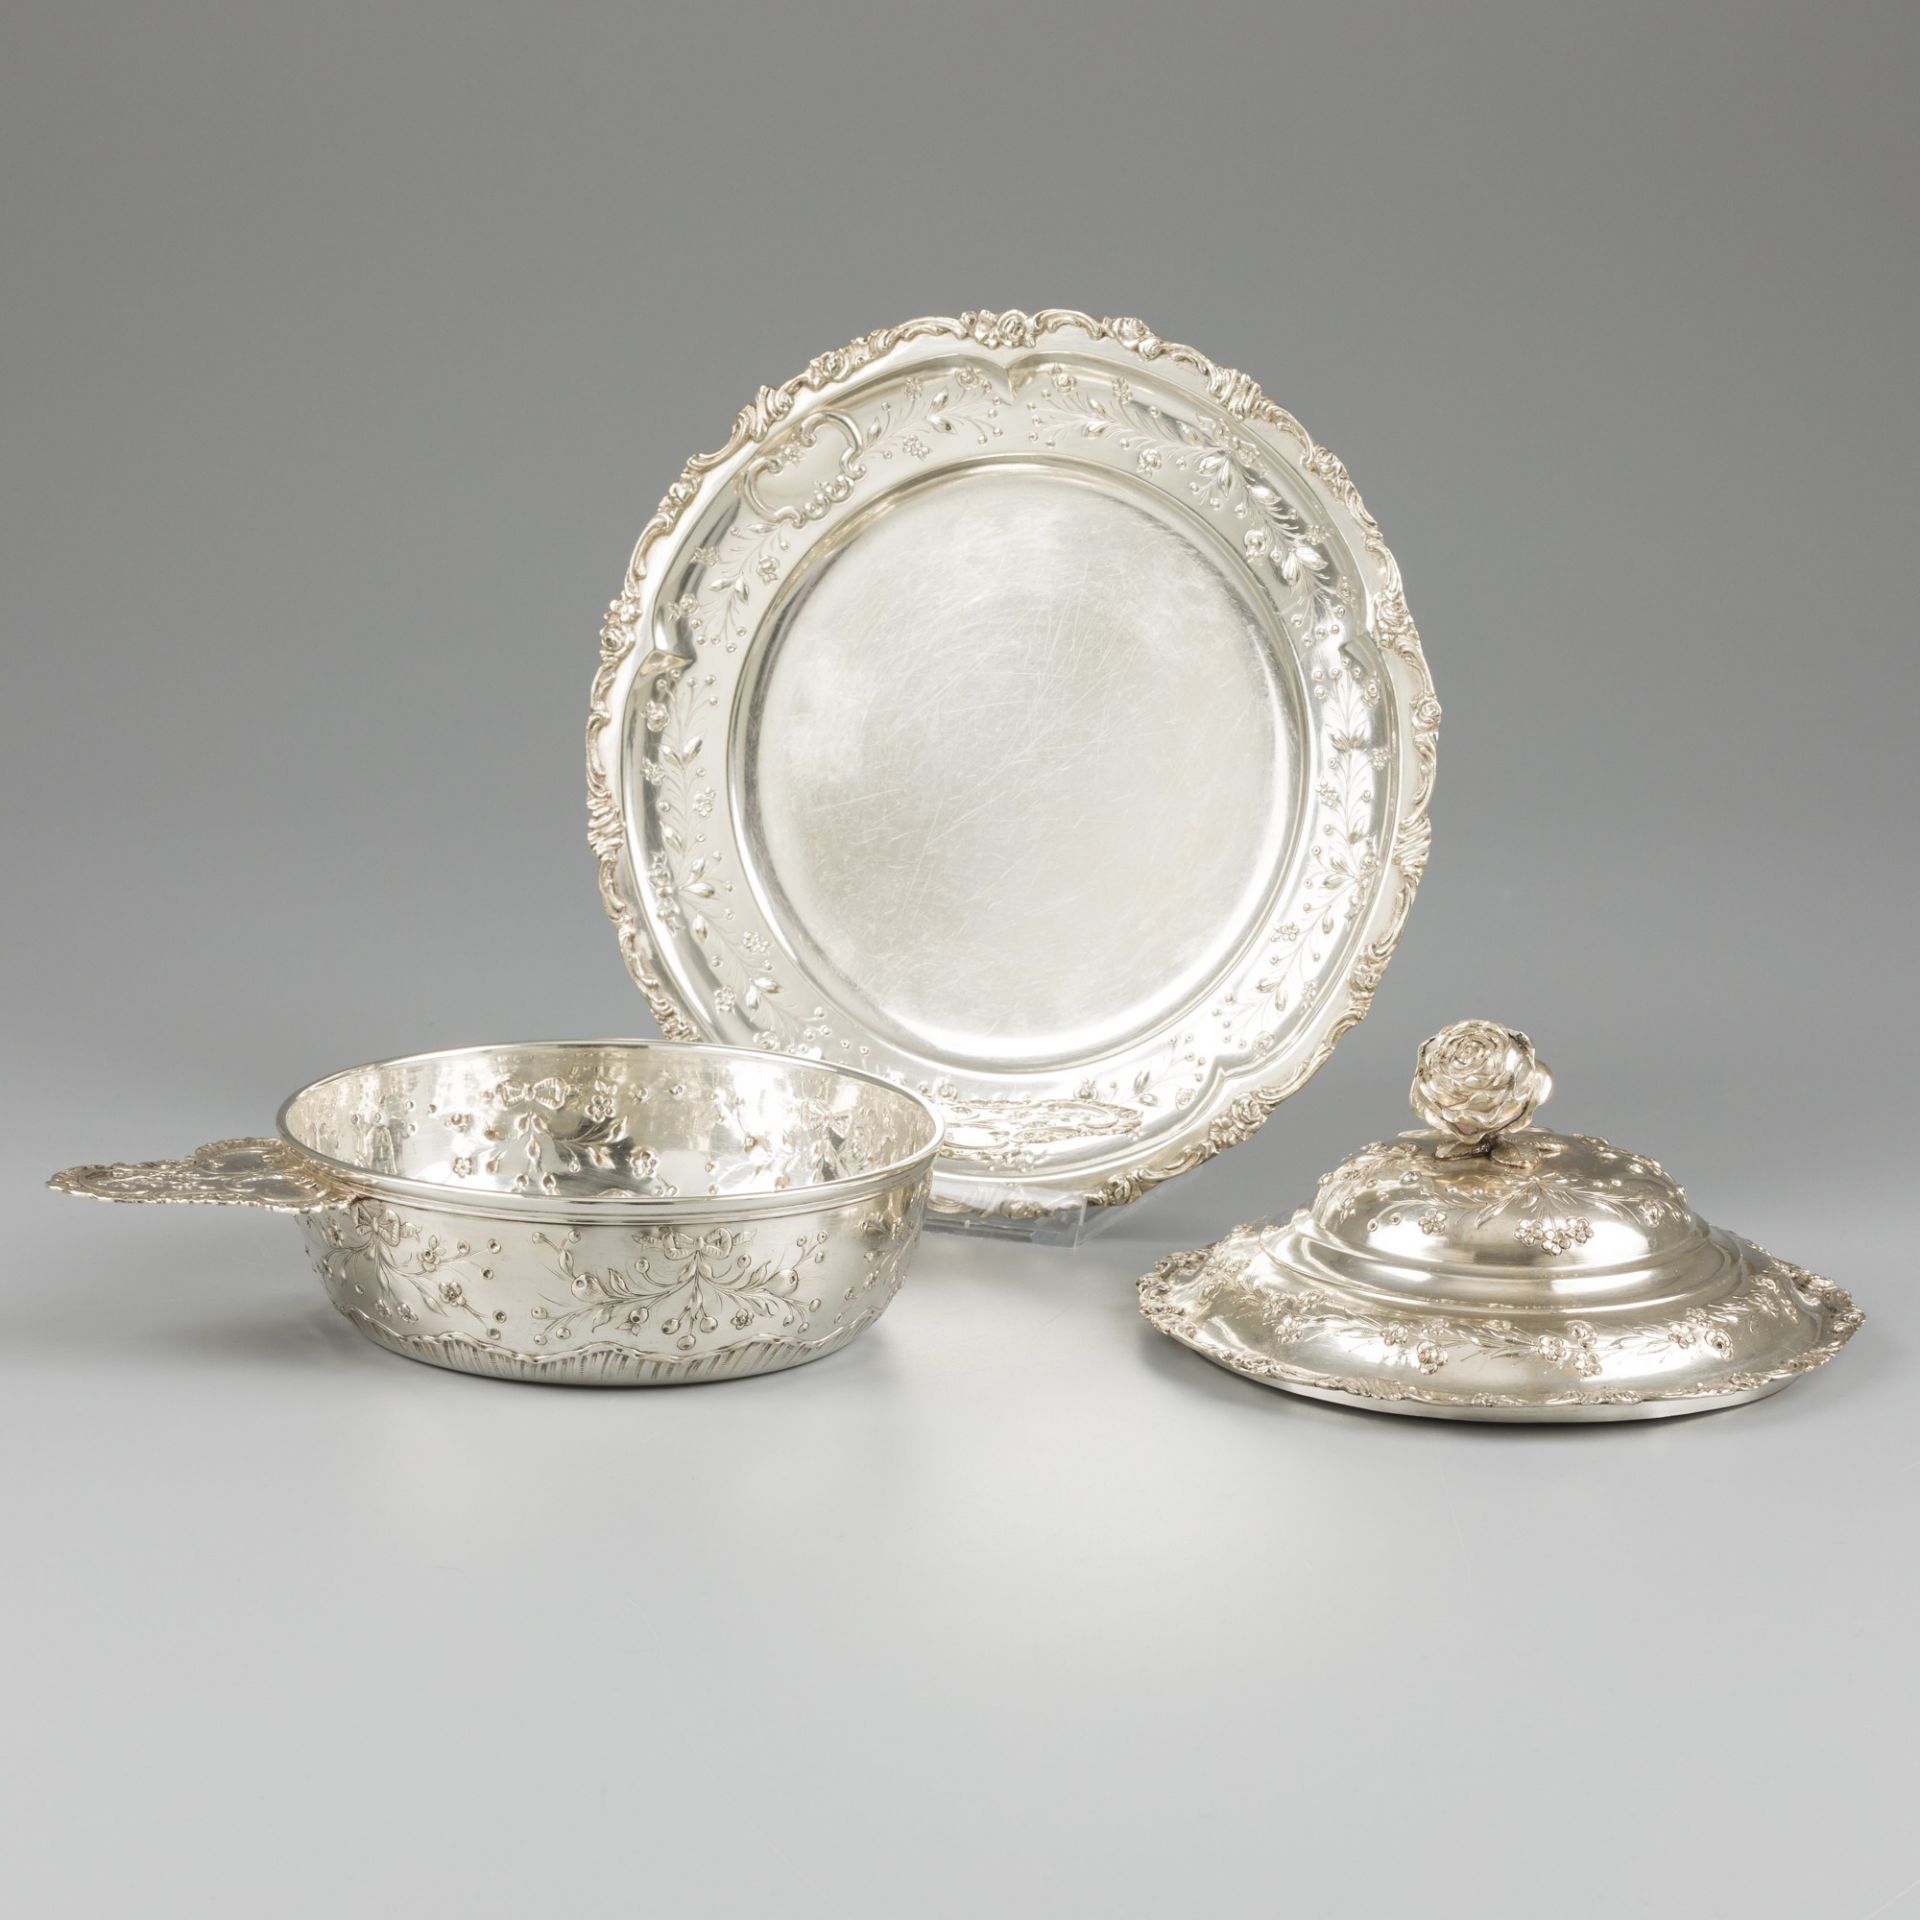 Covered dish with saucer, silver. - Image 4 of 6